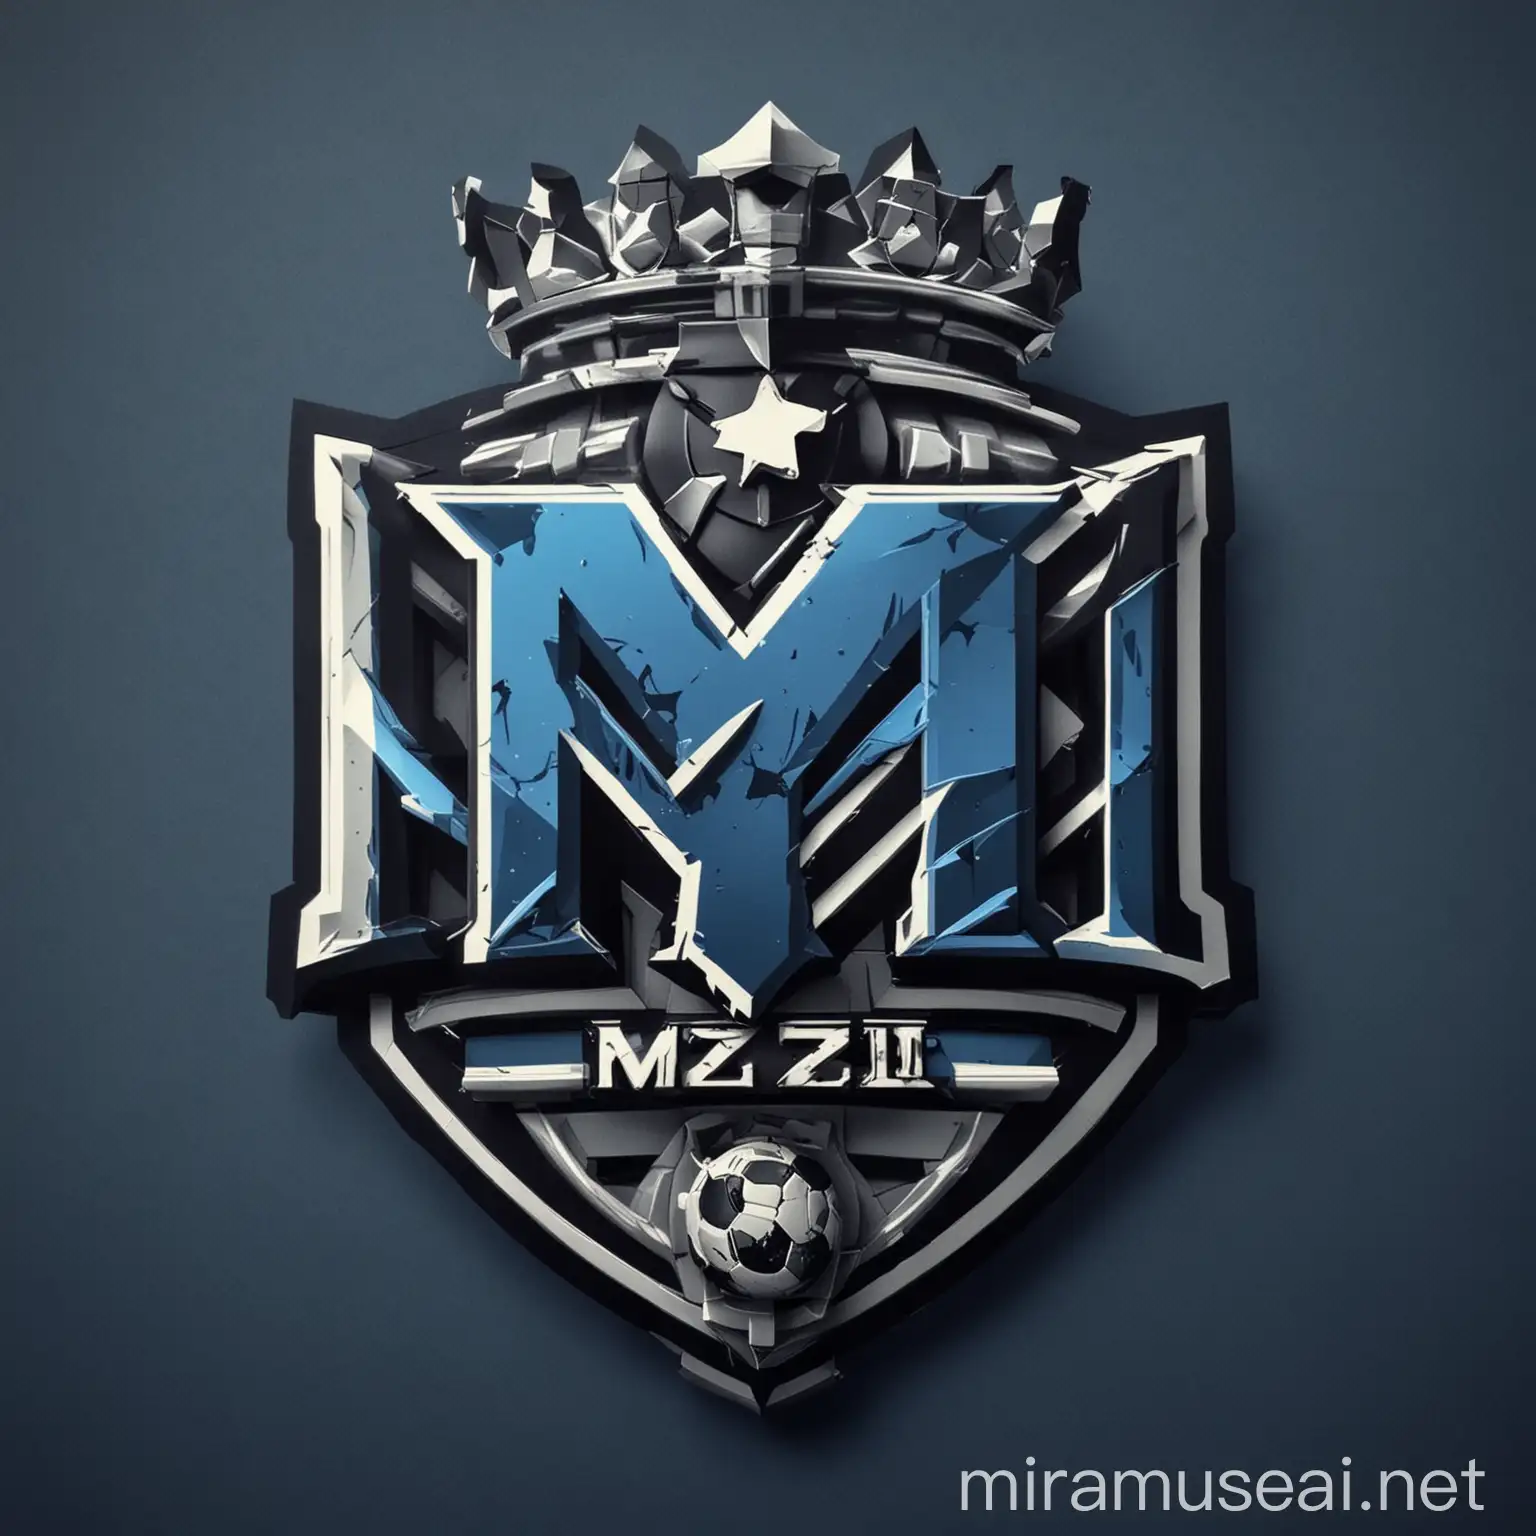 Create a football team logo that includes the text M2Z11. The logo should also include things related to computer engineering and should generally be in a blue-dark blue tone.